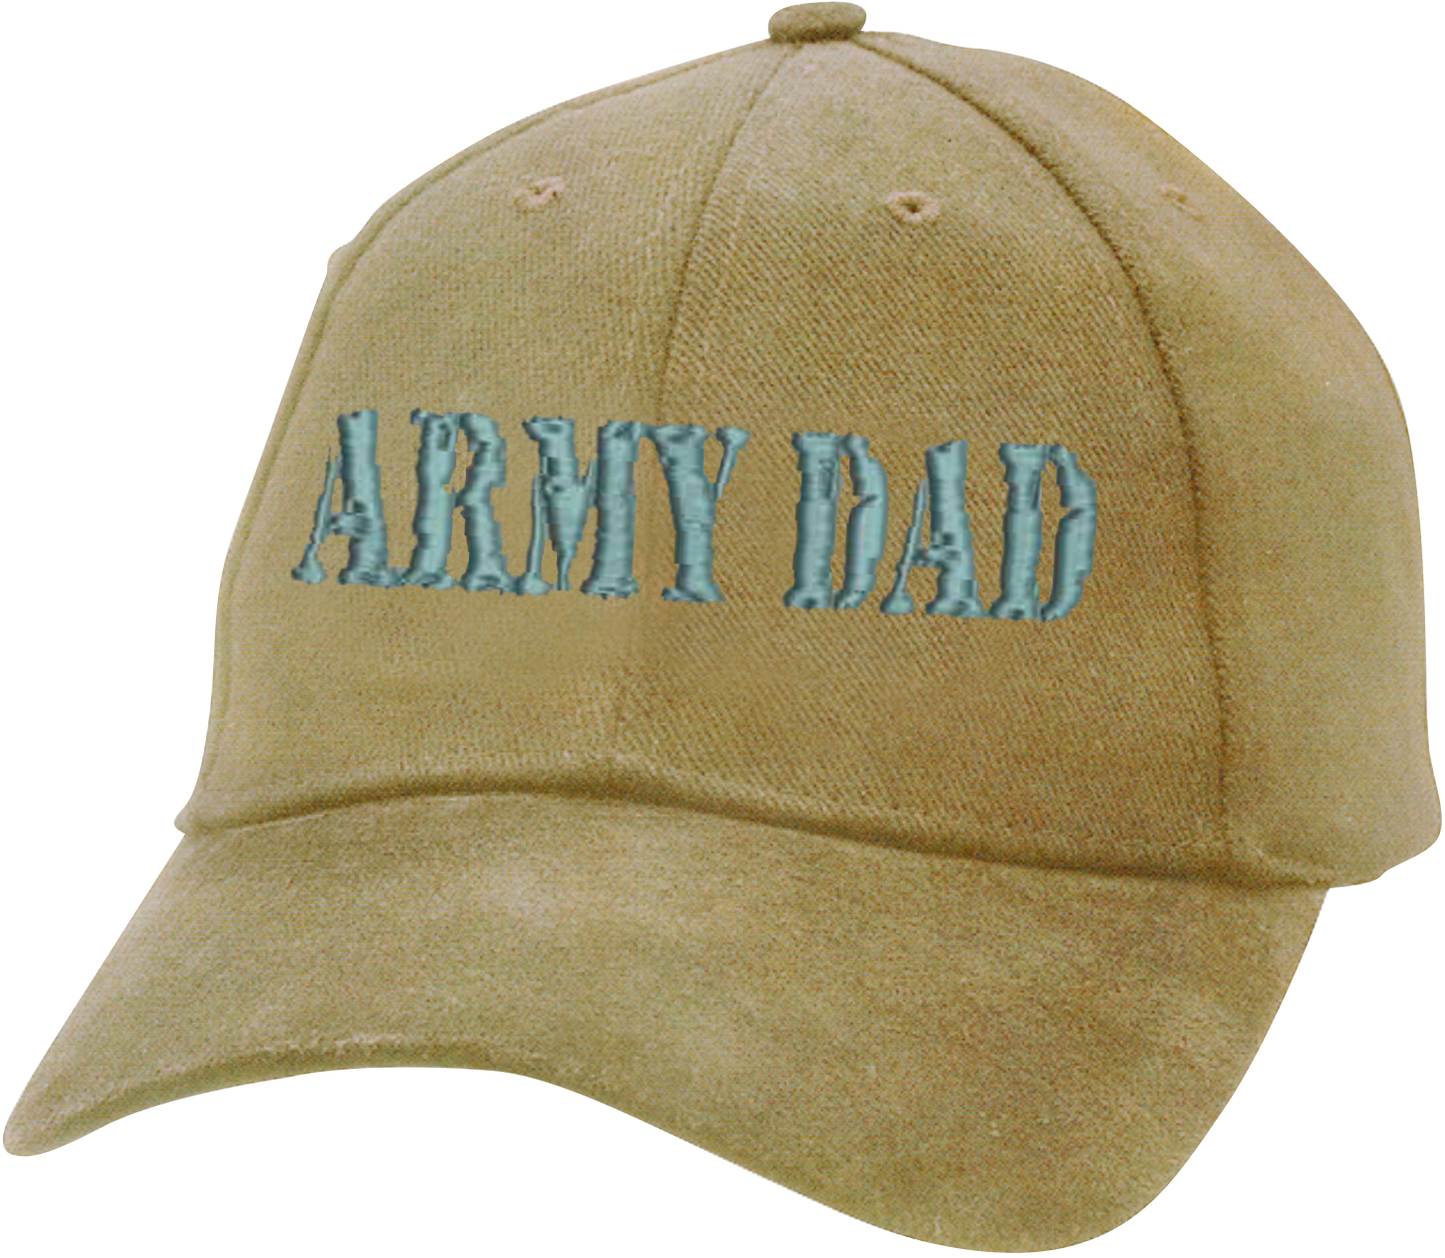 ARMY DAD on Un-Structured Khaki Ball Cap